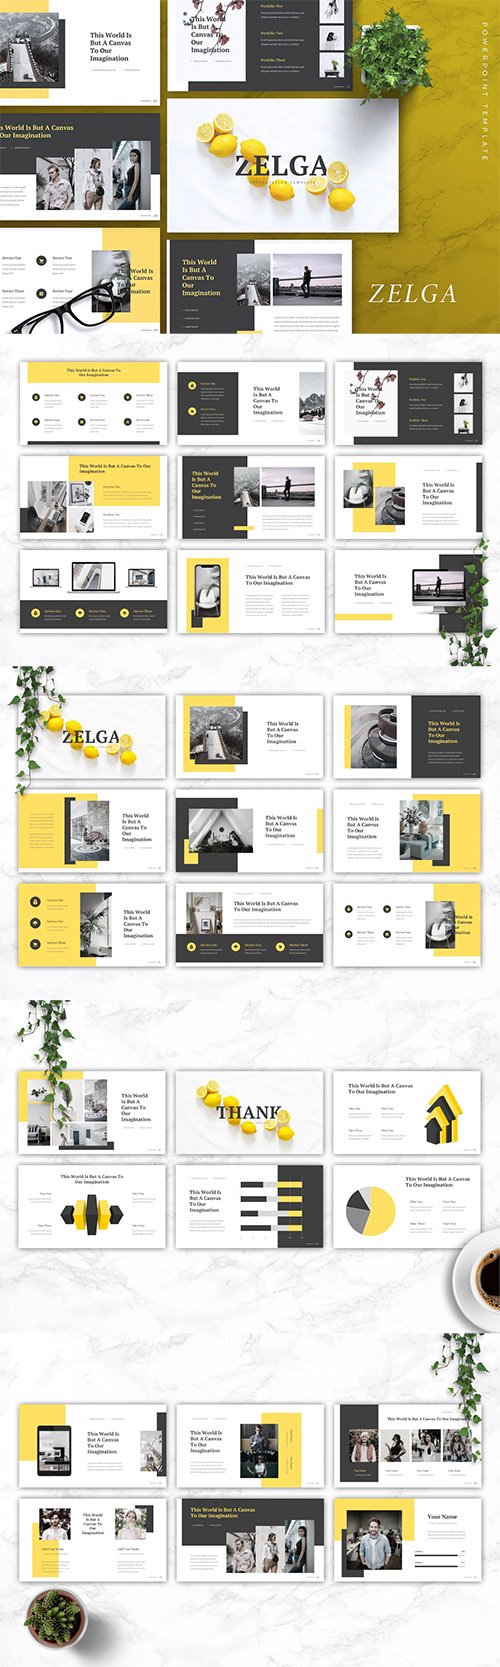 Zelga - Business Powerpoint, Keynote and Google Slides Templates